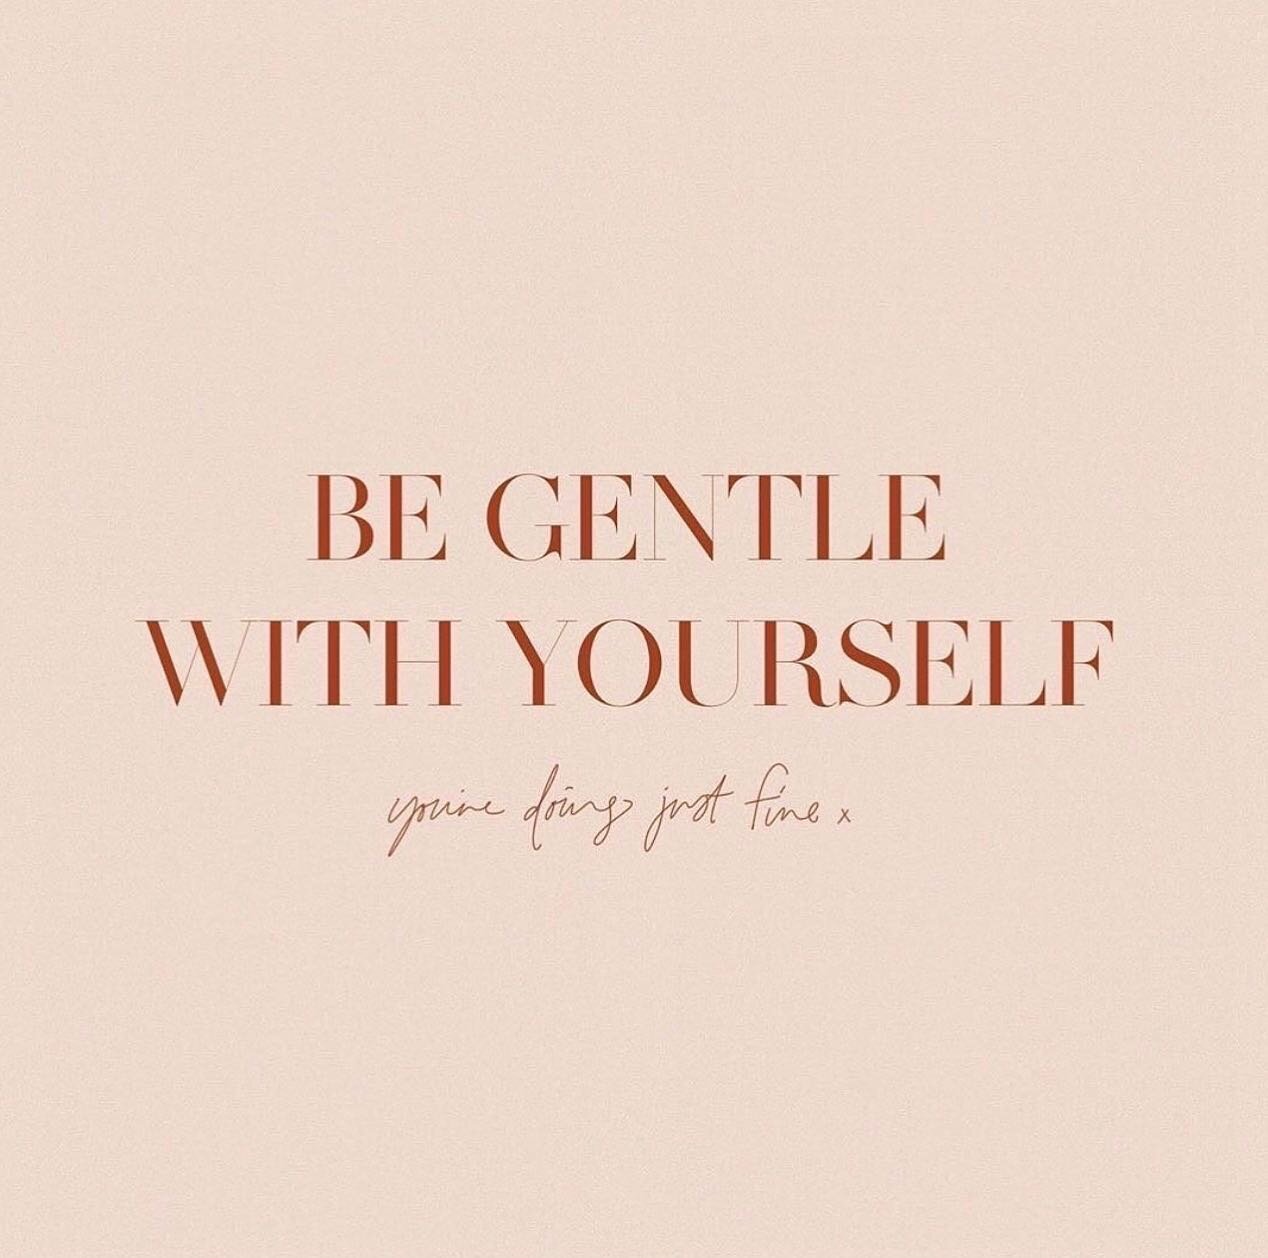 A reminder to be gentle with yourself. Always treat yourself with love and kindness. You are doing just fine. 

It&rsquo;s easy to get caught up in our busy lives, our imperfections, or shortcomings, and get stuck comparing to unrealistic ideas of pe